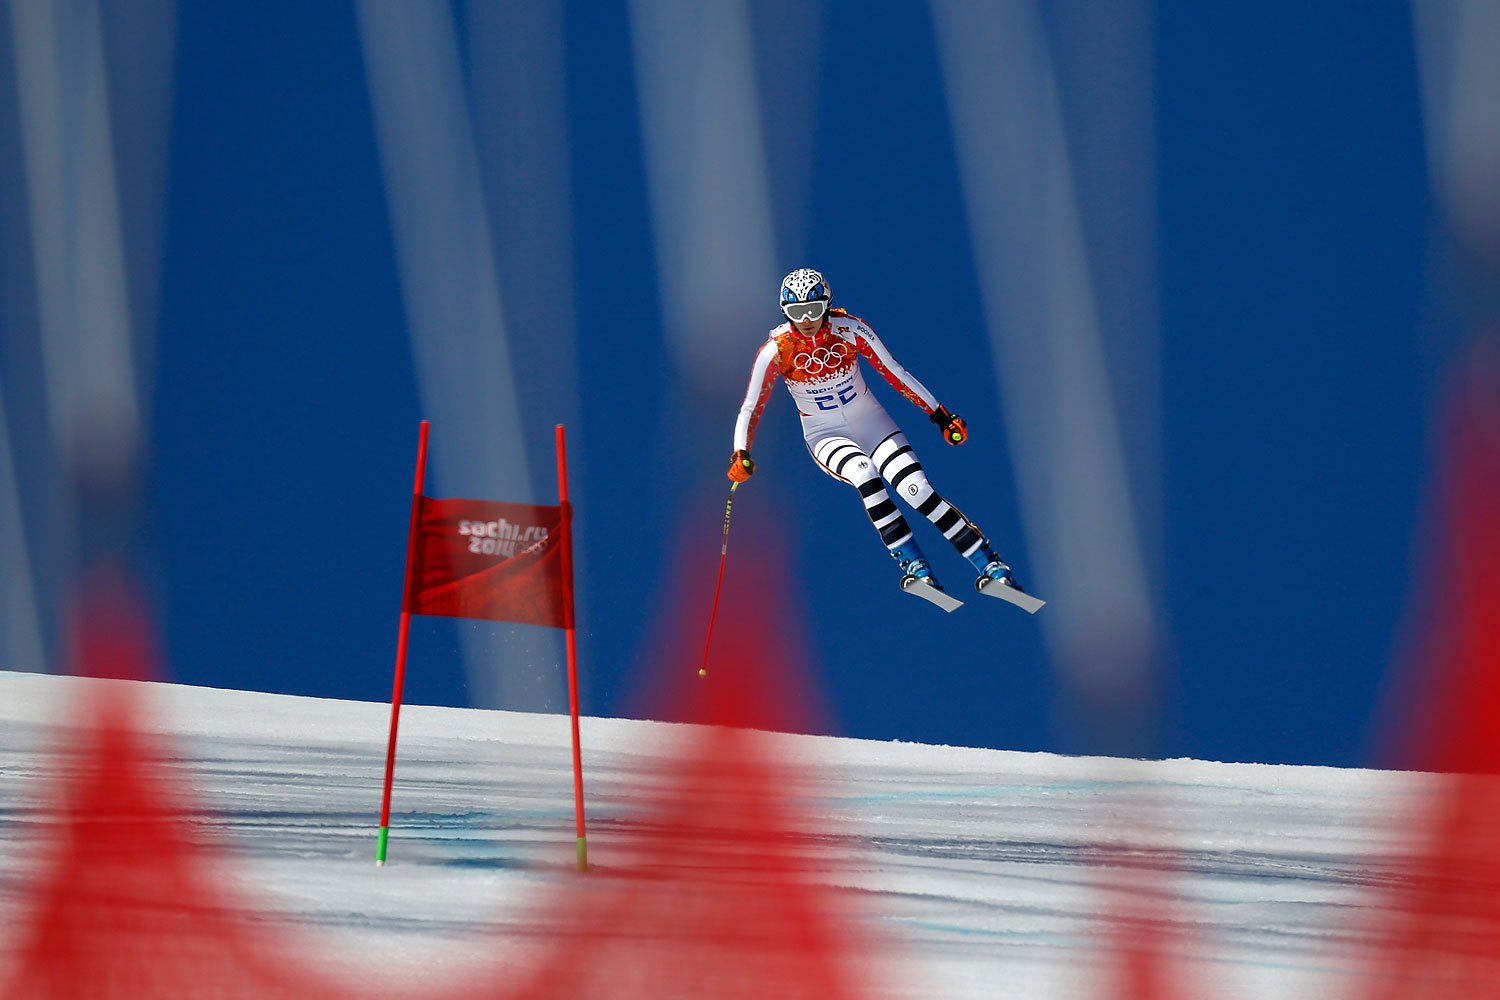 Maria Hoefl-Riesch of Germany competing in the Alpine Skiing Women's Super-G.